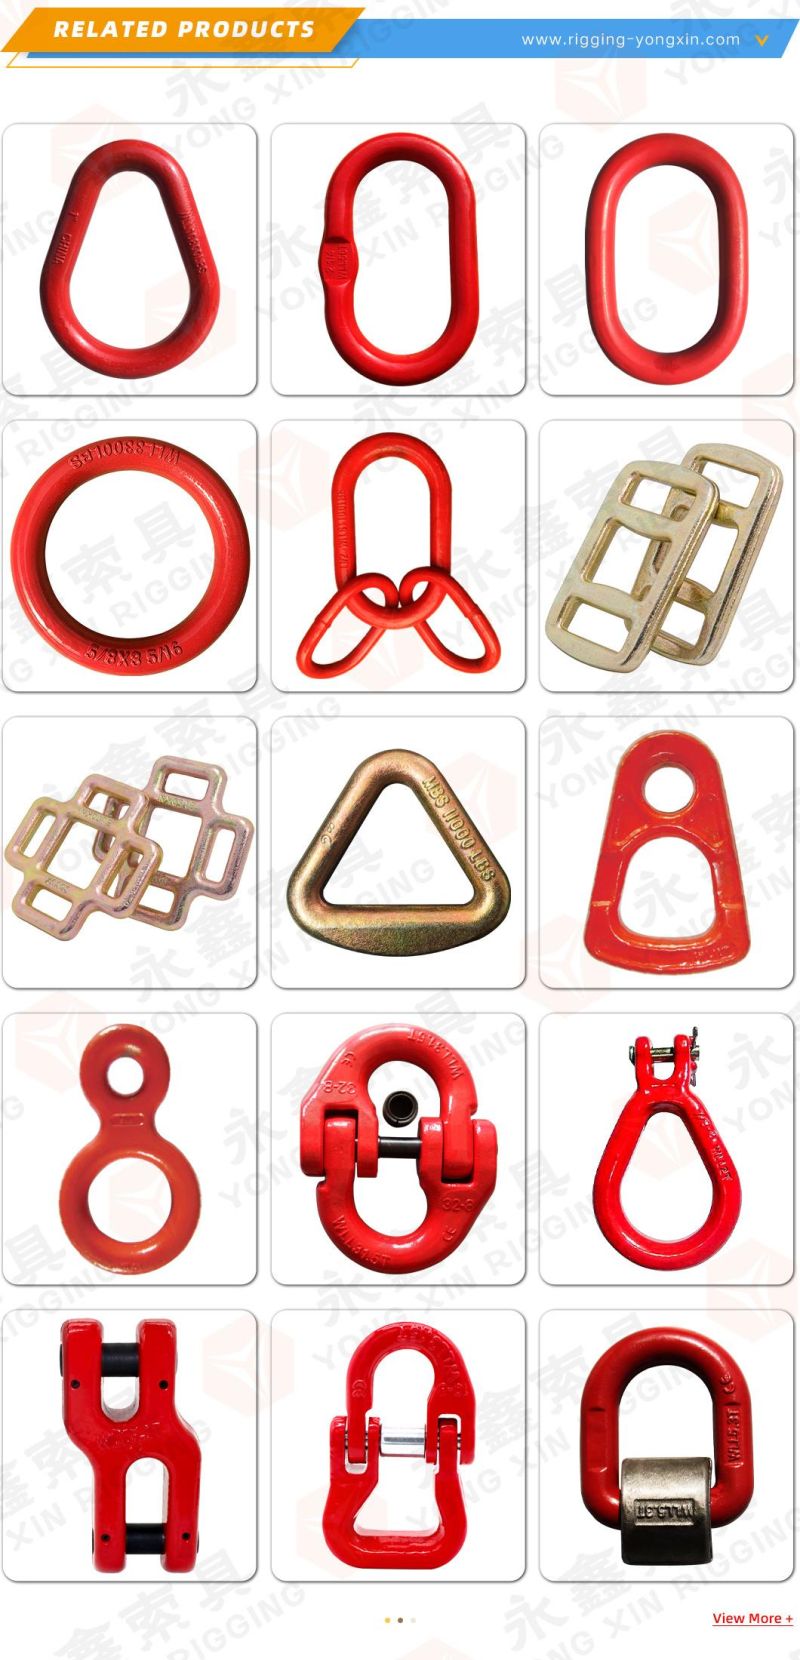 Rigging Hardware Sling Part Connecting Link Forged Lifting Point Connecting Link|Sling Part Lashing Accessories Connecting Link|Heavy Duty Chain Link